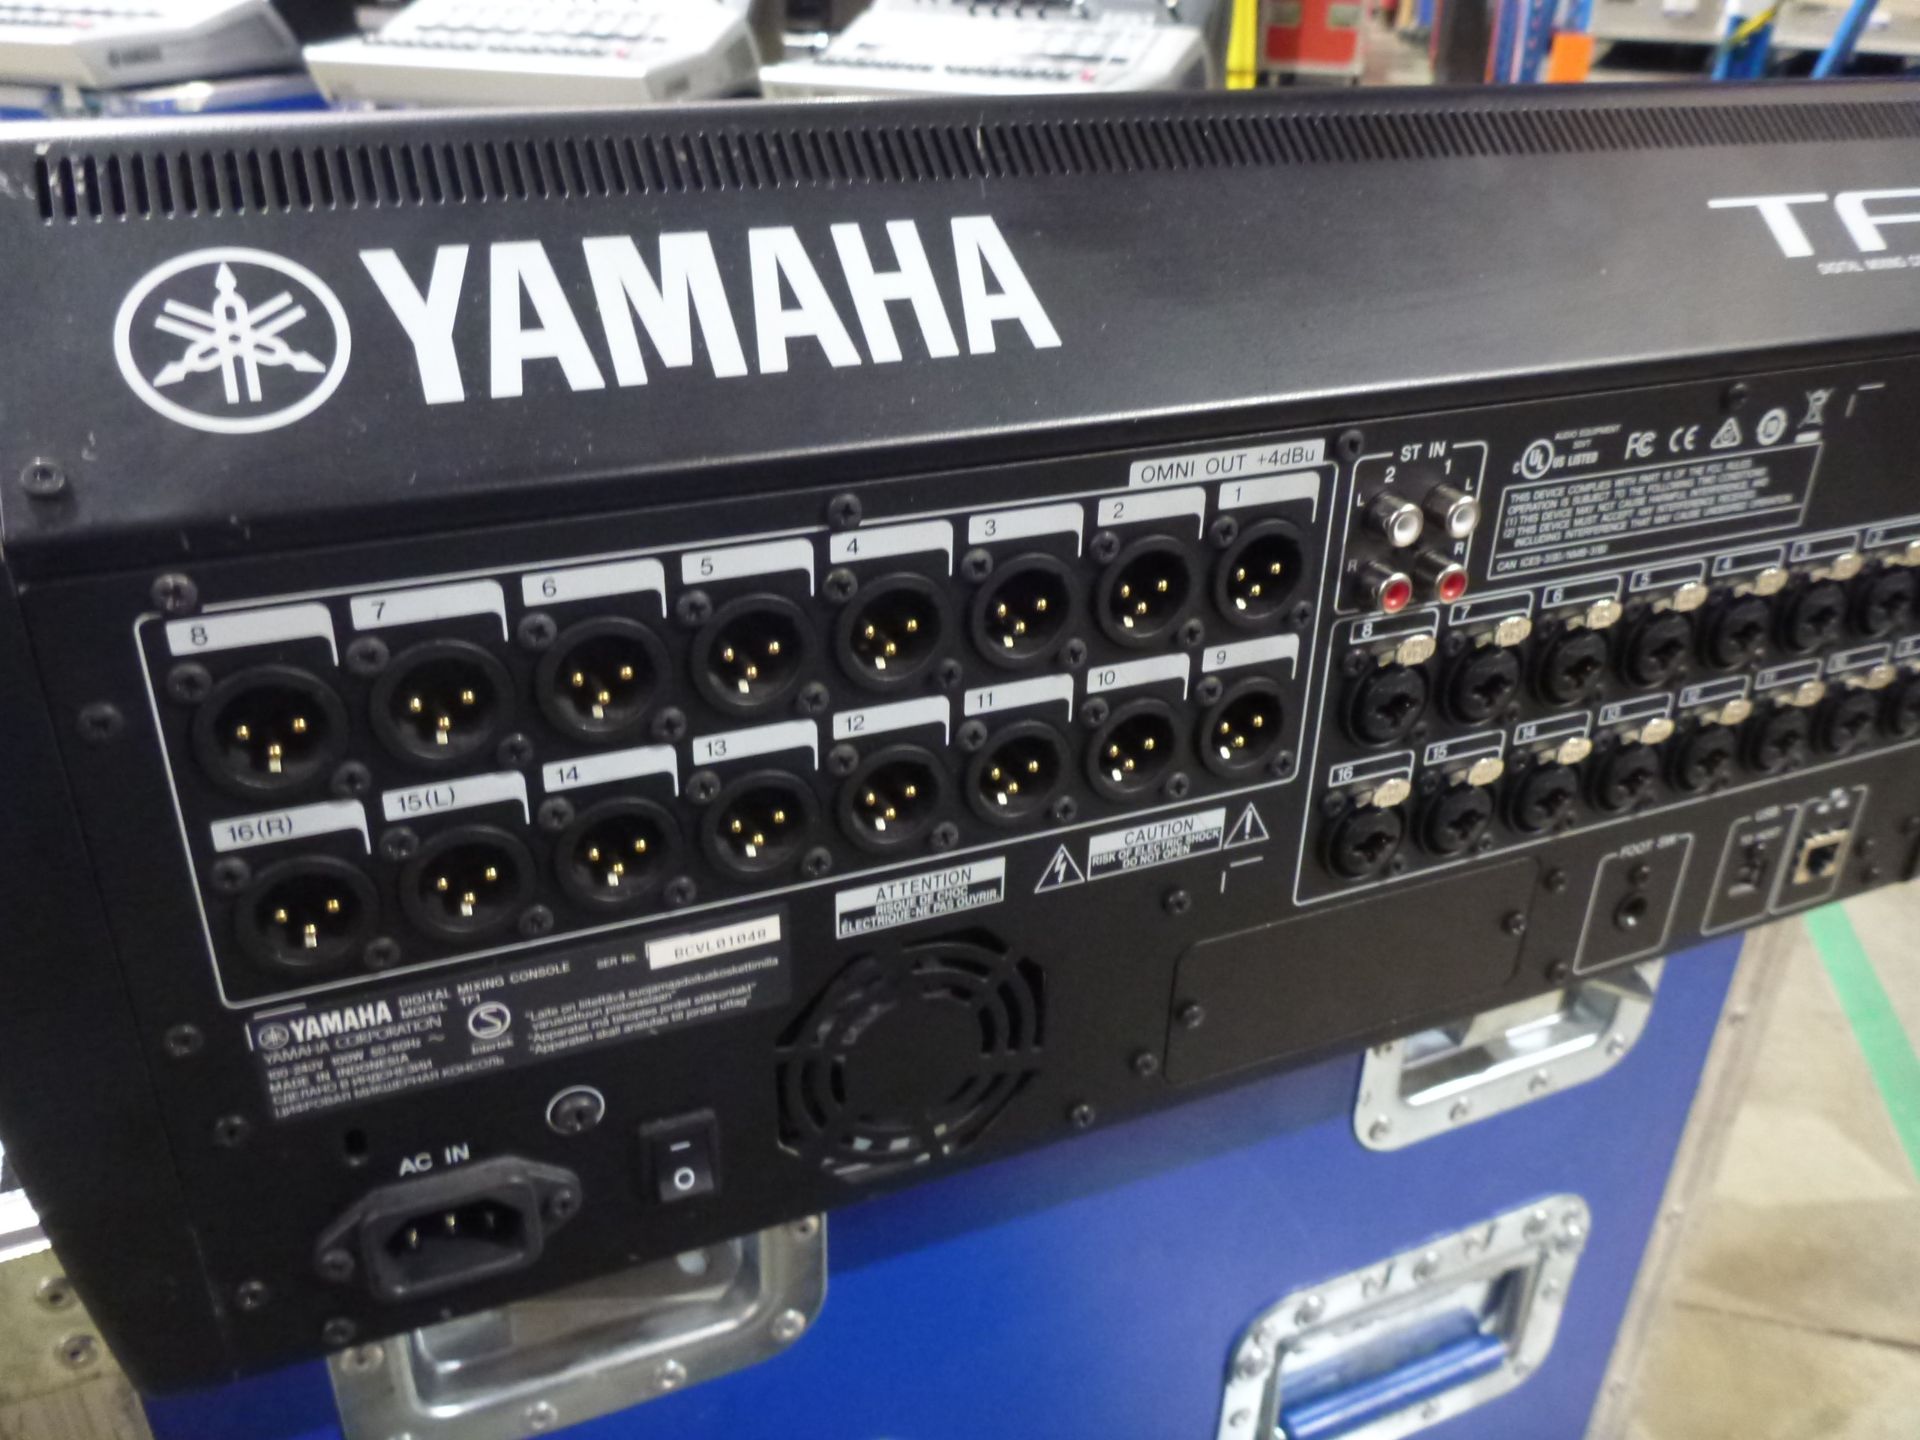 Yamaha TF1 32 Channel Digital Audio Mixing Desk, S/N BCVL01048, In flight case with power supply - Image 5 of 7